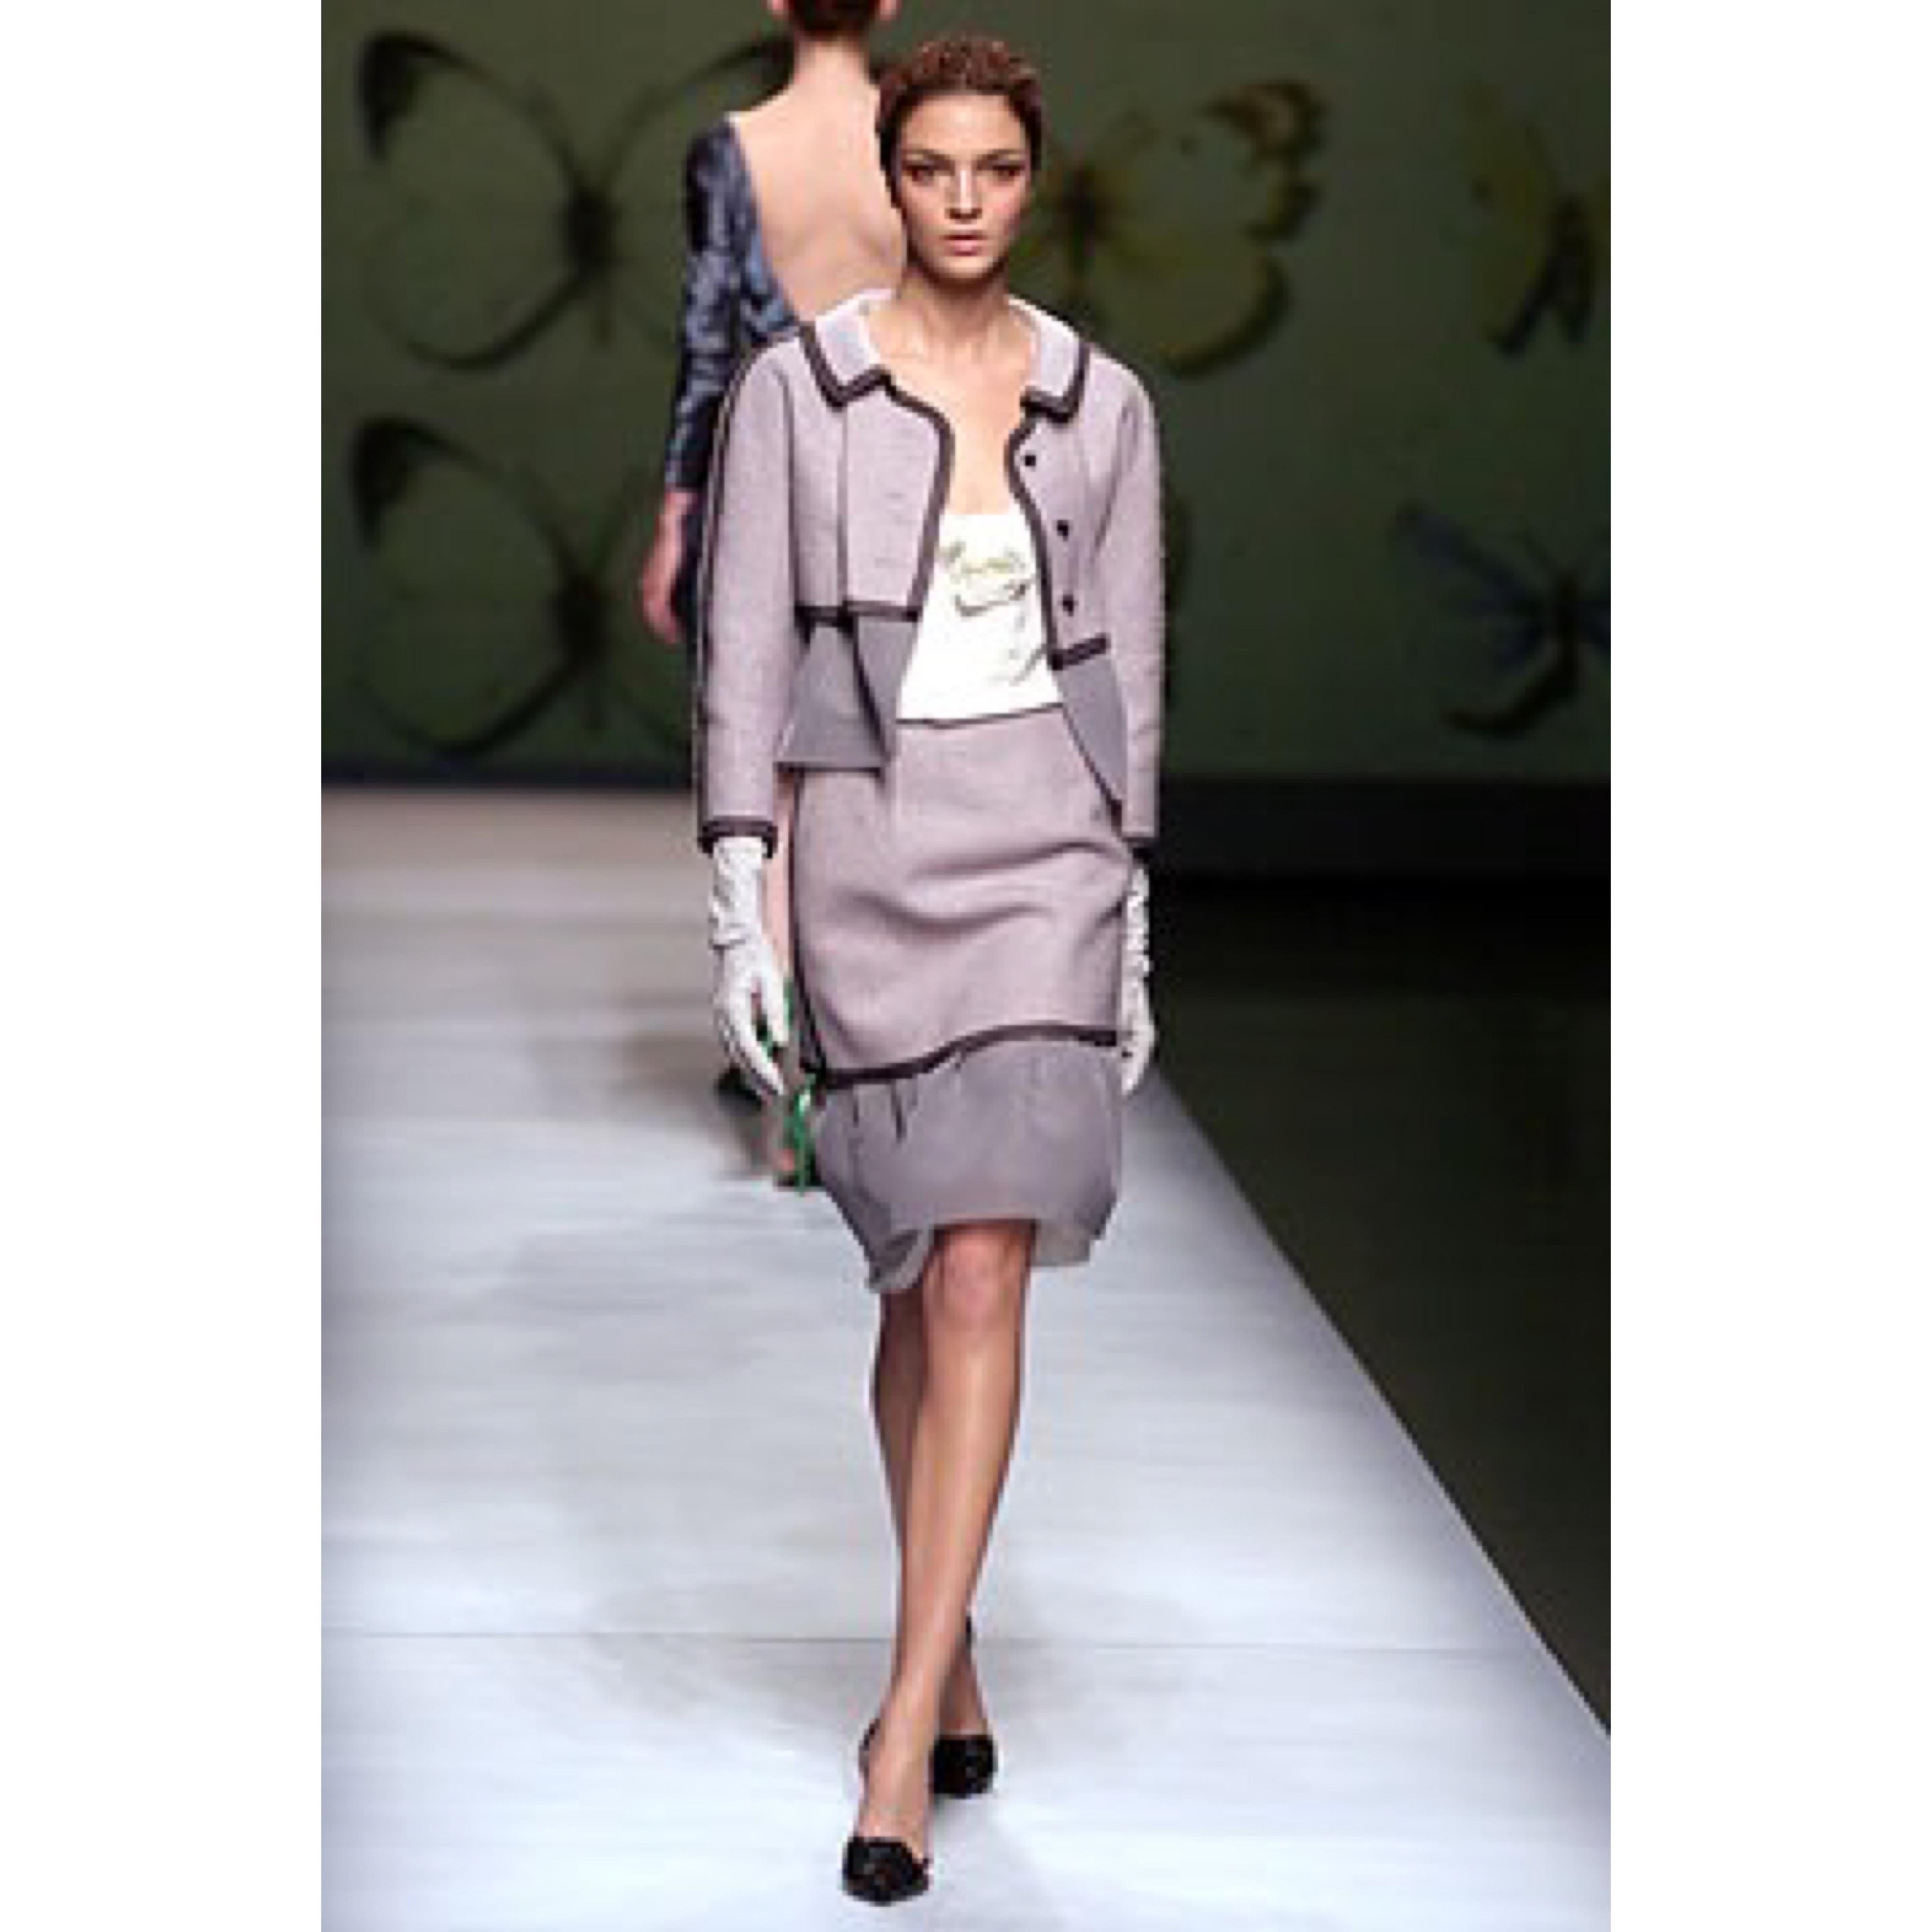 Beautiful ROCHAS Runway Fall 2004 light purple, black and gray skirt suit ! Pillbox jacket features three black enamel buttons up the front. Semi sheer mesh detail at waist. High waisted skirt has hidden zipper up the side with hook-and-eye closure.